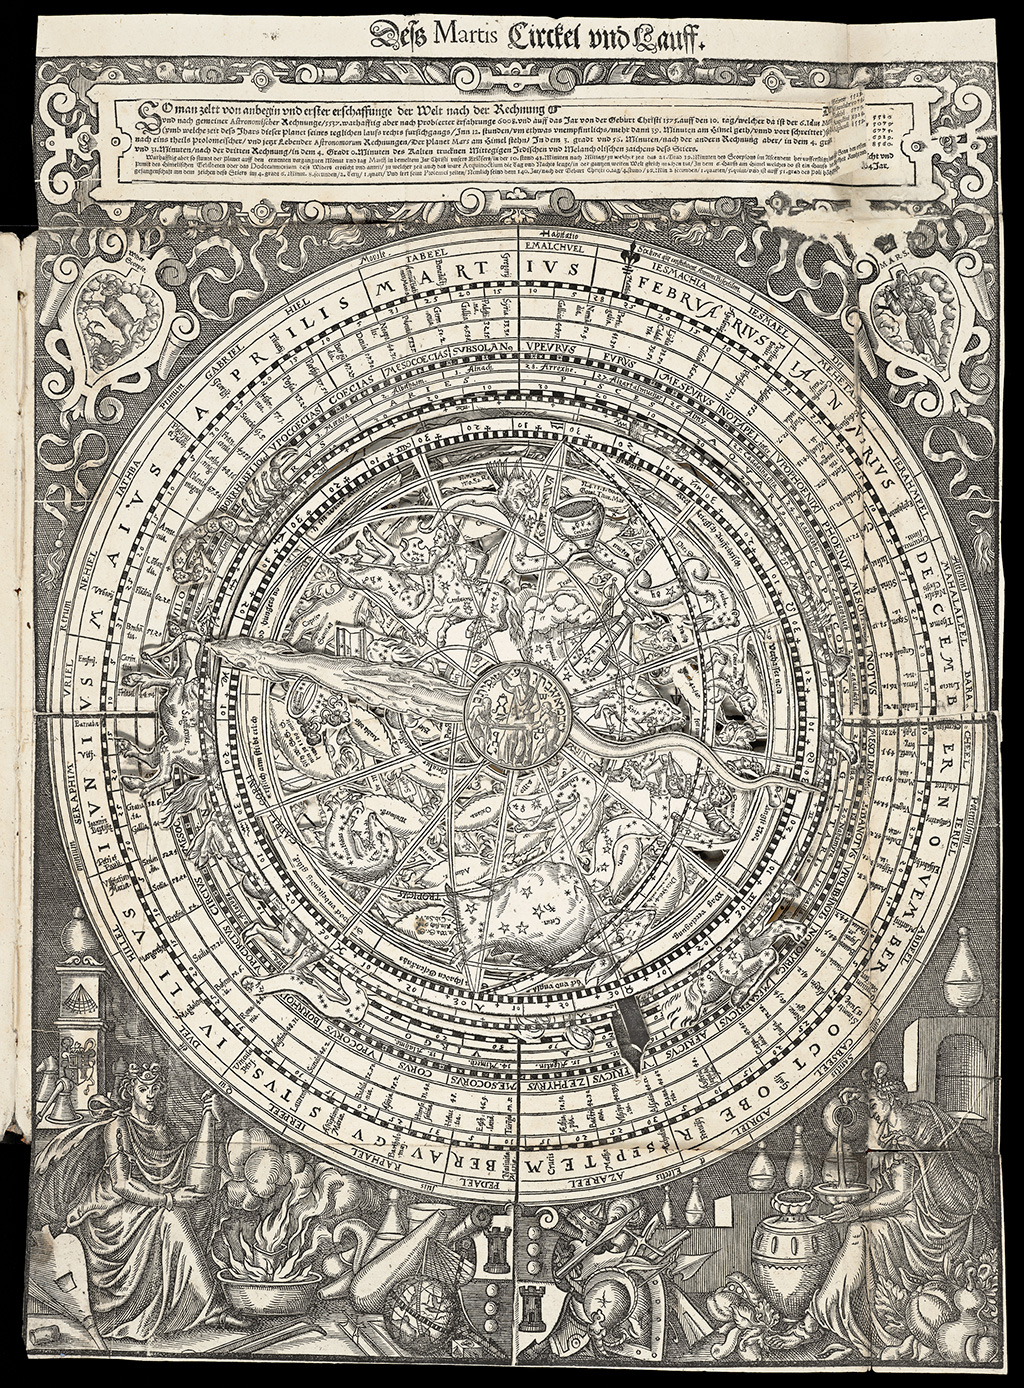 Calculating Celestial Movement, Peter Hille, 1575